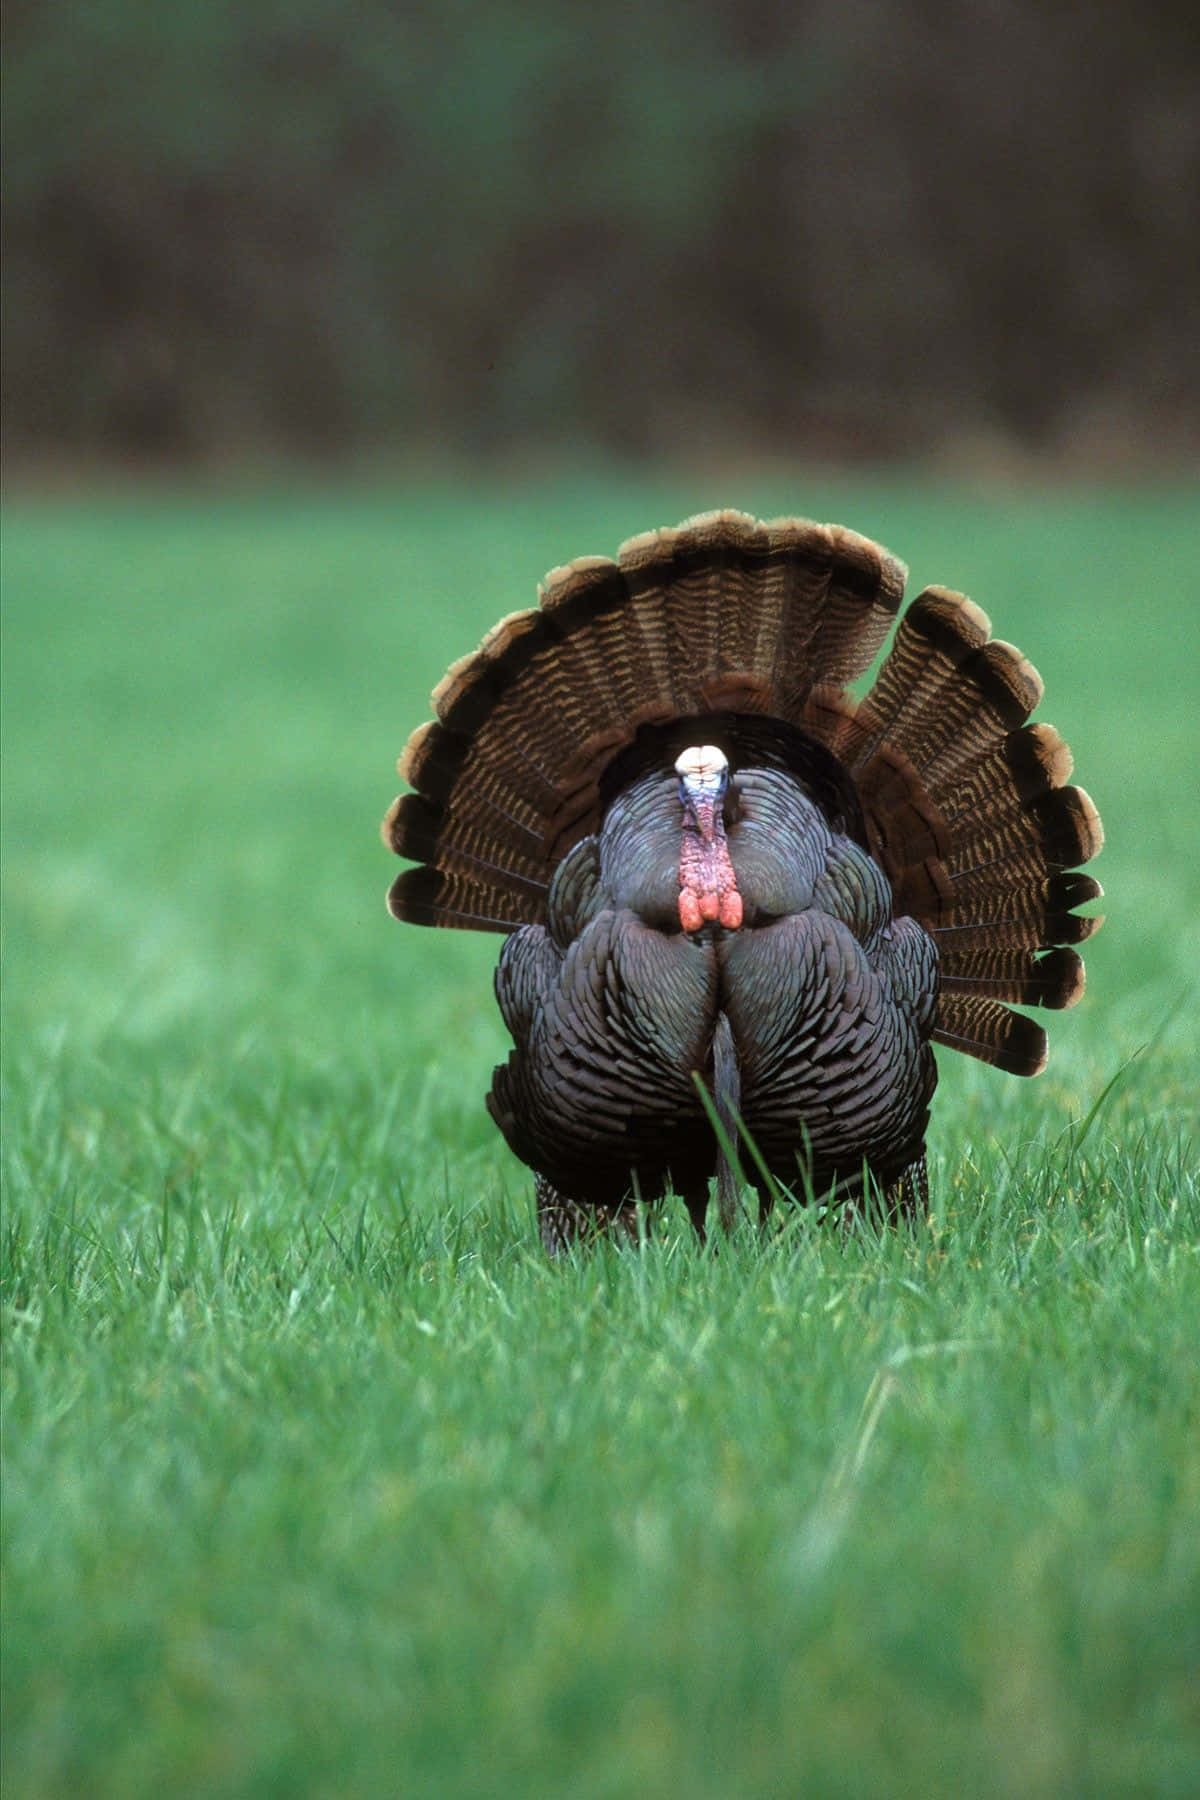 A Turkey Standing In The Grass